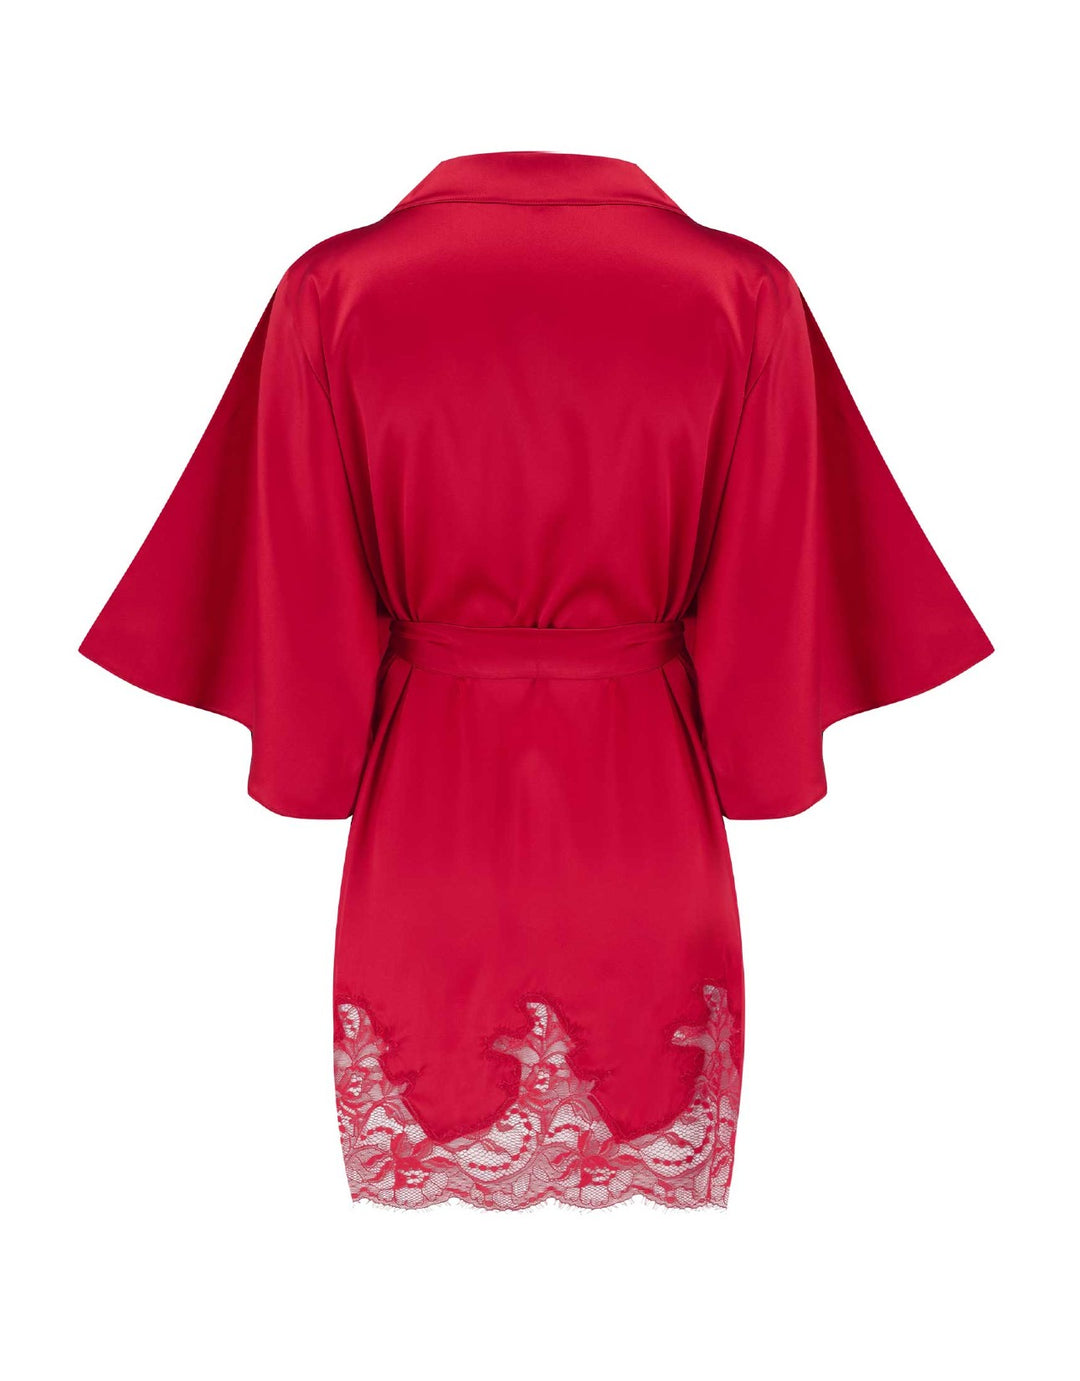 Fleur of England Adeline Red Silk & Lace Short Robe